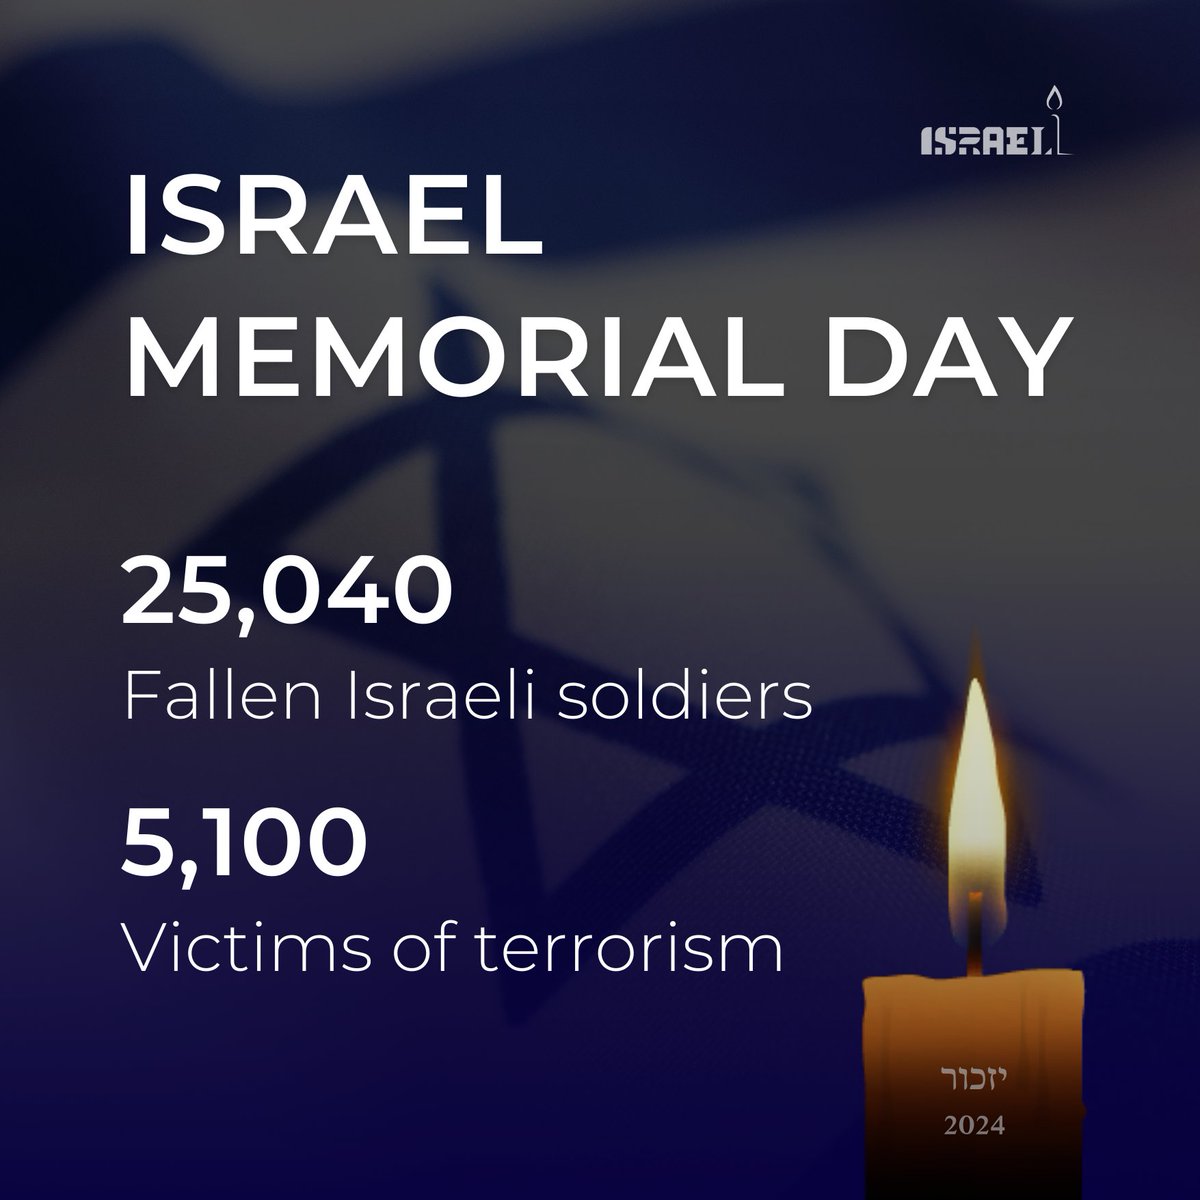 We bow our heads and remember the 25,040 fallen Israeli soldiers and 5,100 victims of terrorism since our country's founding. This Israel Memorial Day is especially hard. We stand in solidarity with the families of the victims, with our men and women in uniform and promise